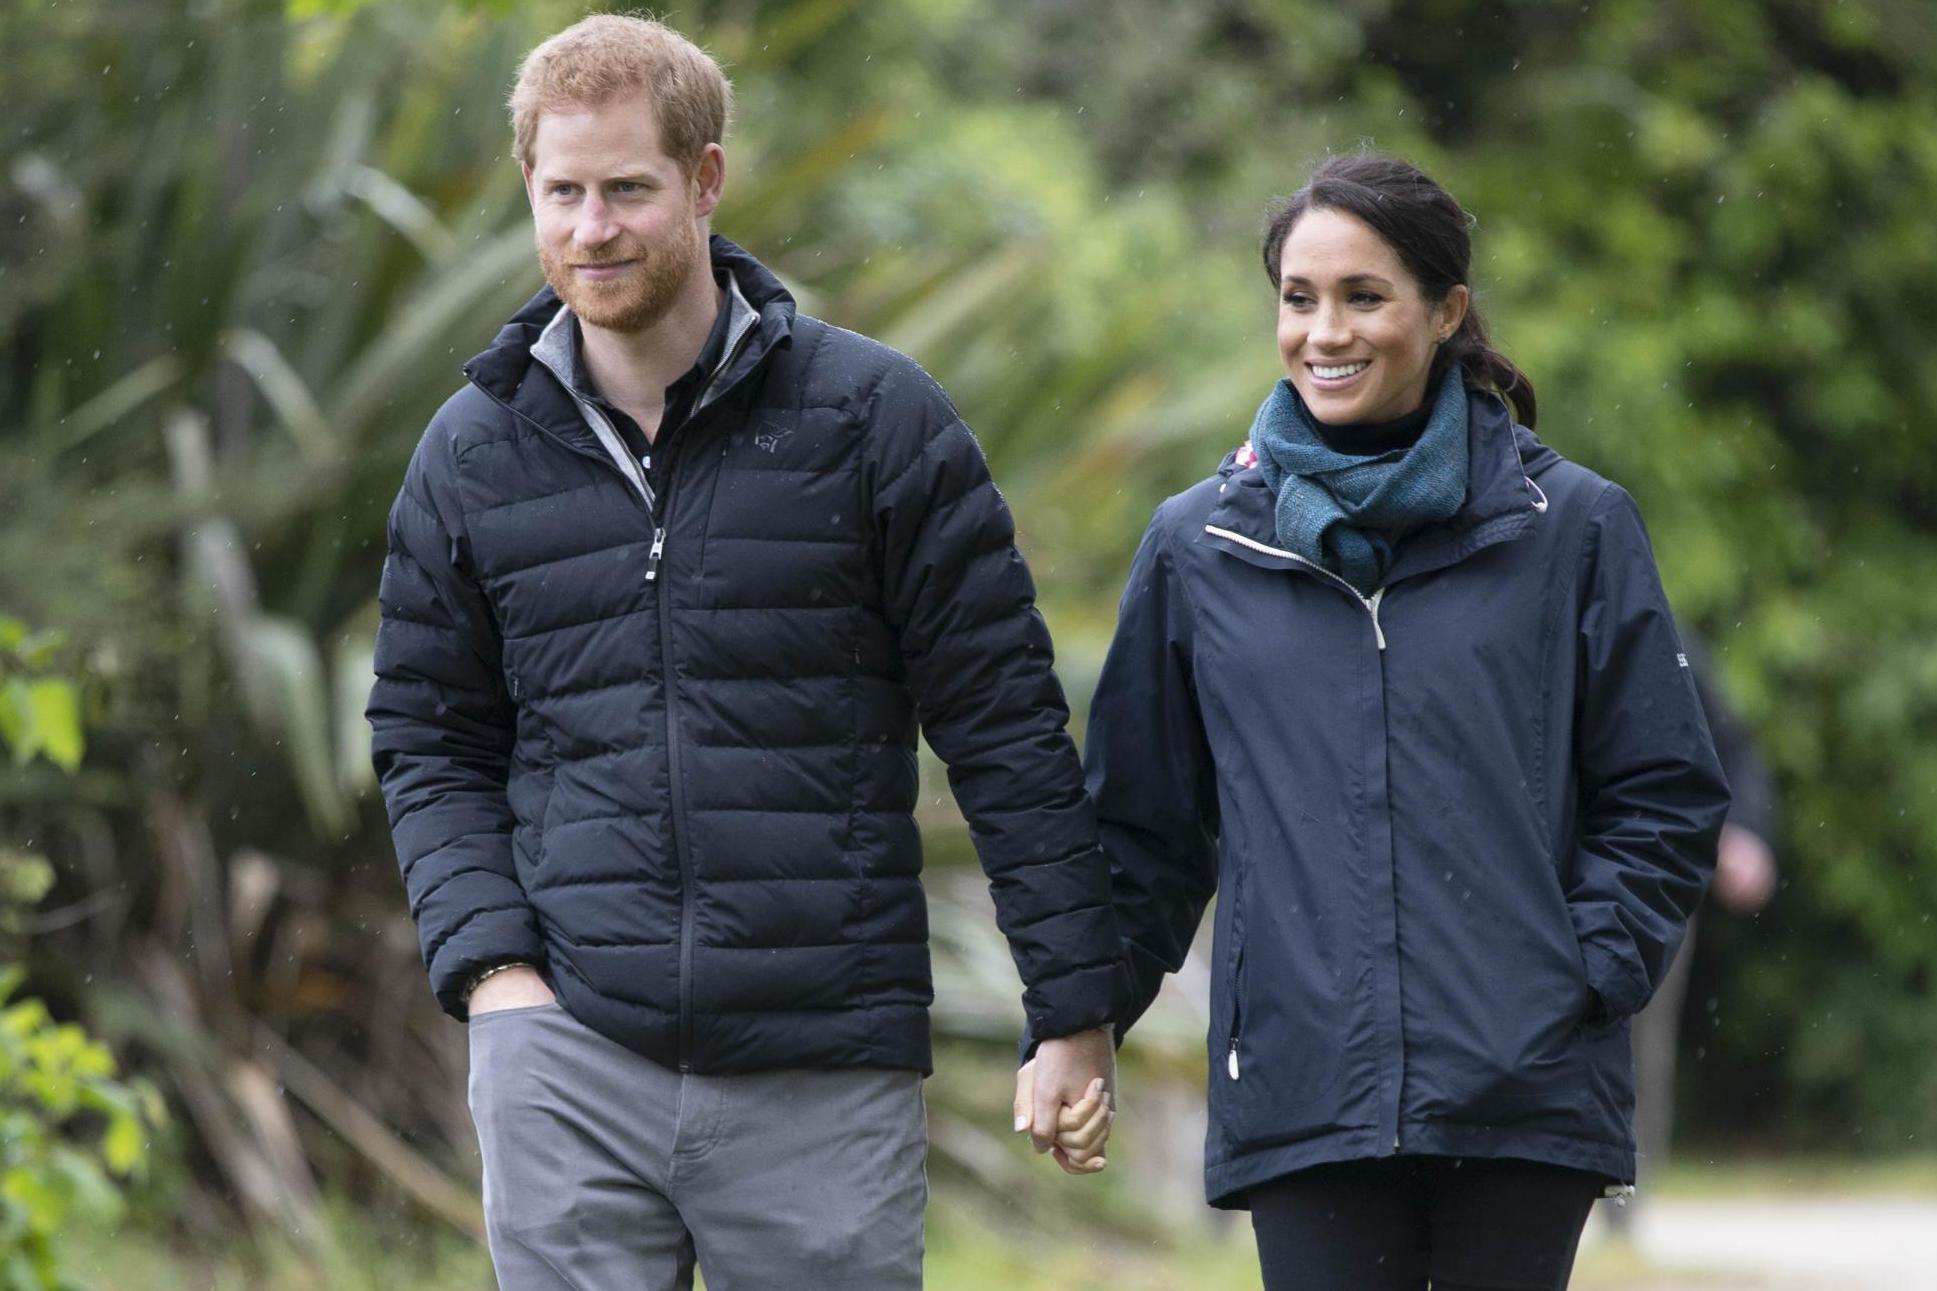 Pula: The special meaning behind the name of Prince Harry and Meghan Markle's rescue dog